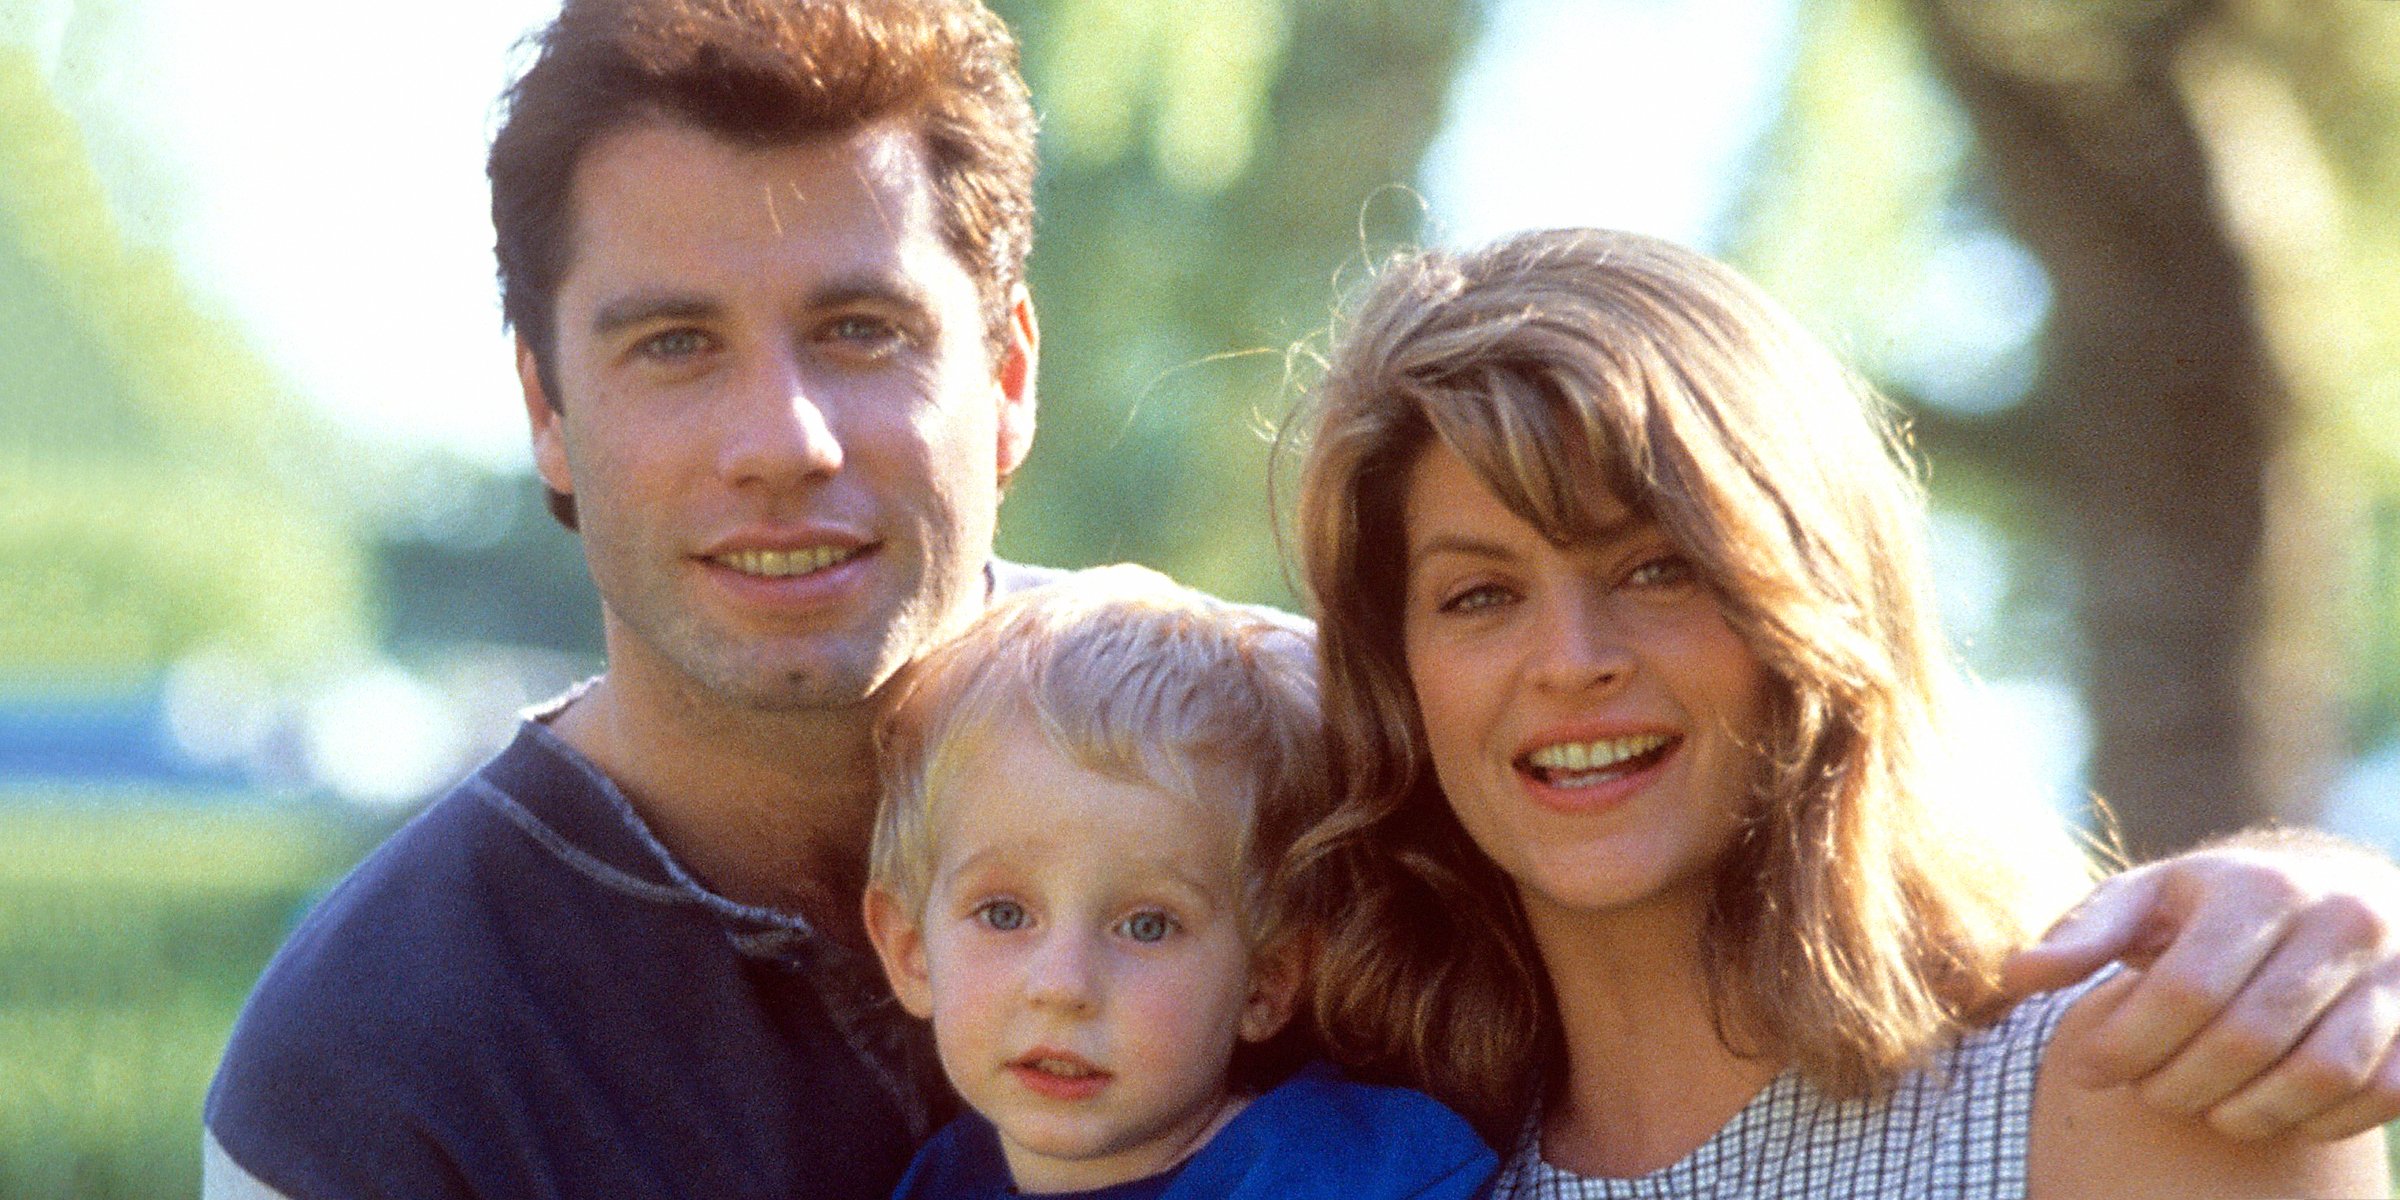 Kirstie Alley, John Travolta, and Christopher Aydon | Source: Getty Images